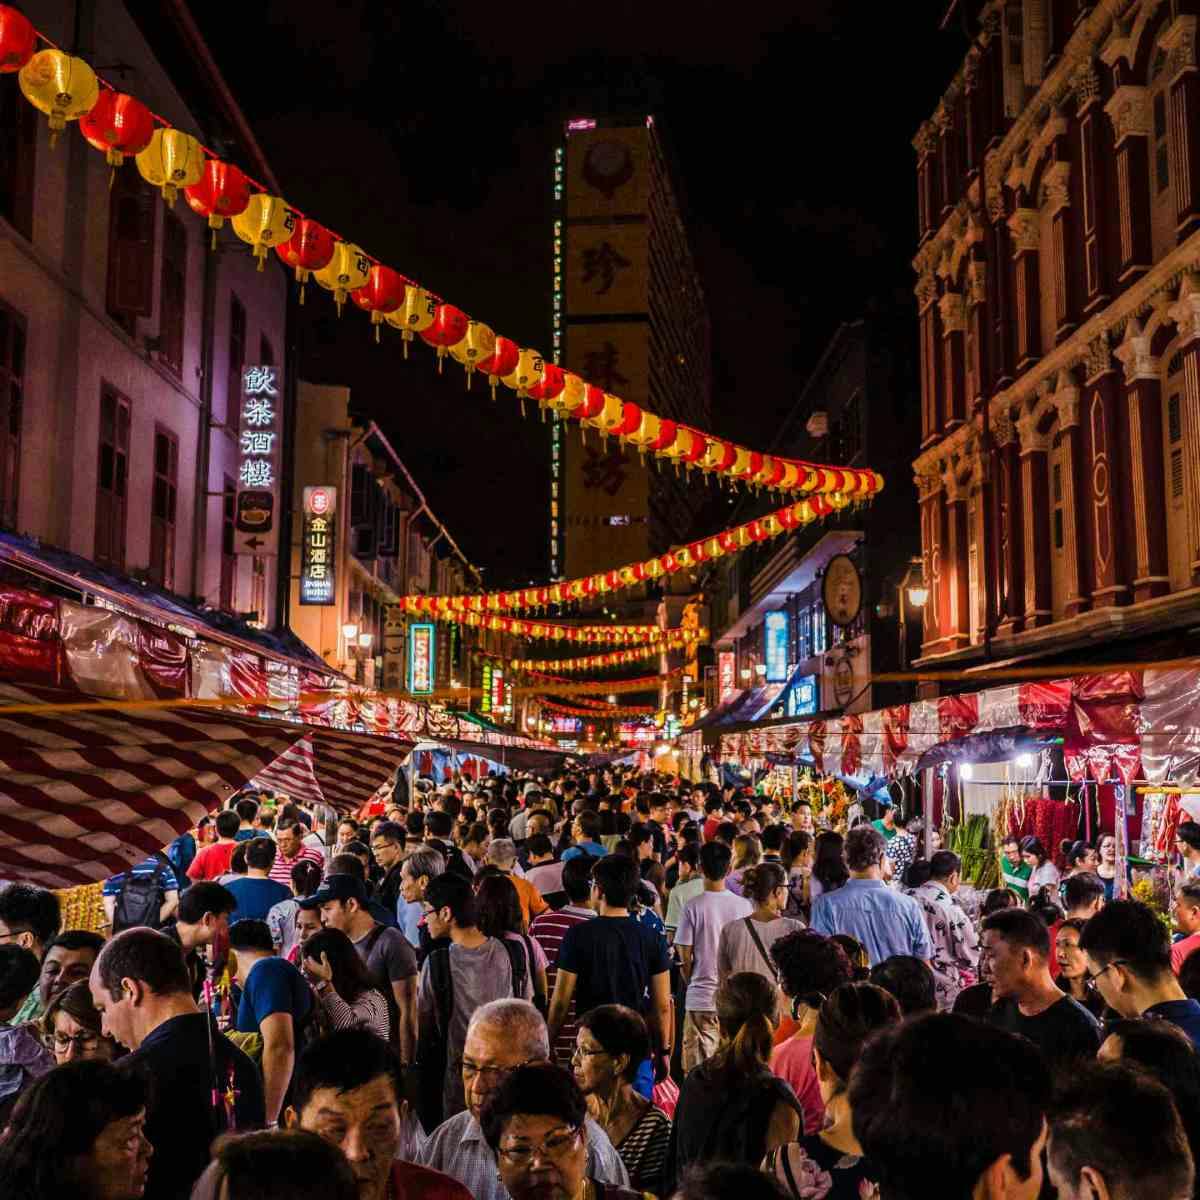 Popular heritage brands to visit in Chinatown Singapore